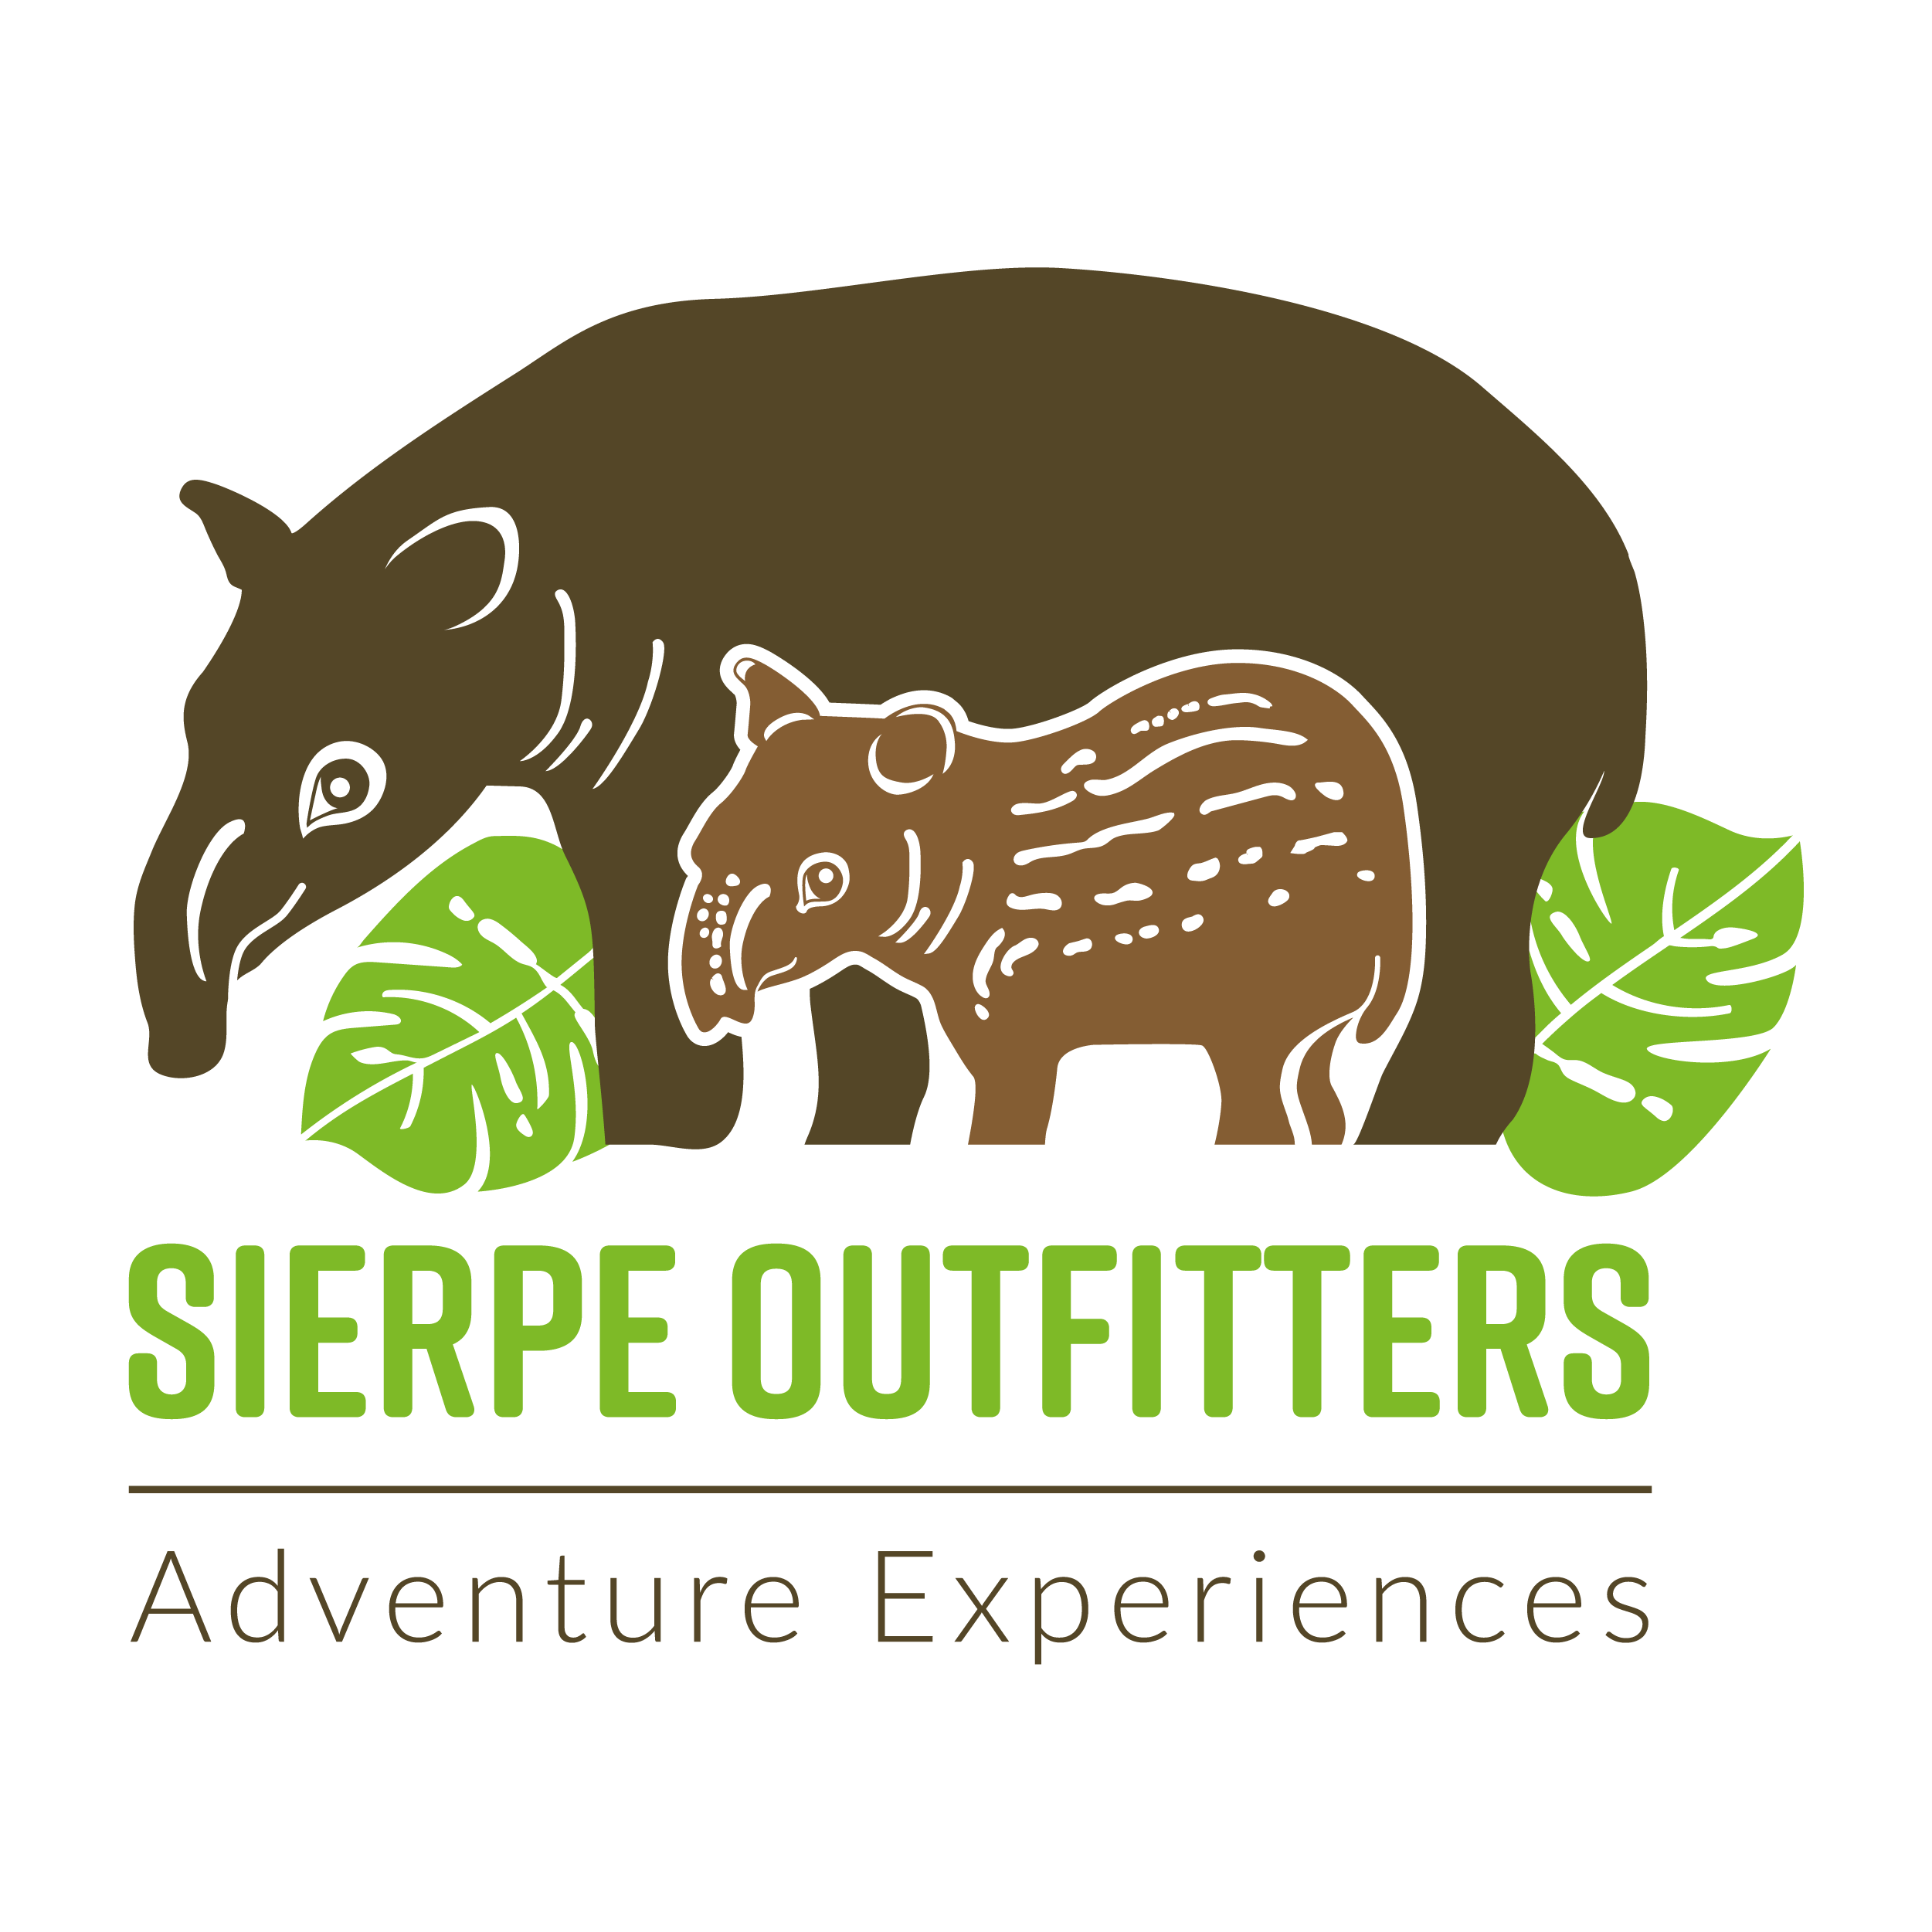 sierpe outfitters logo final full color